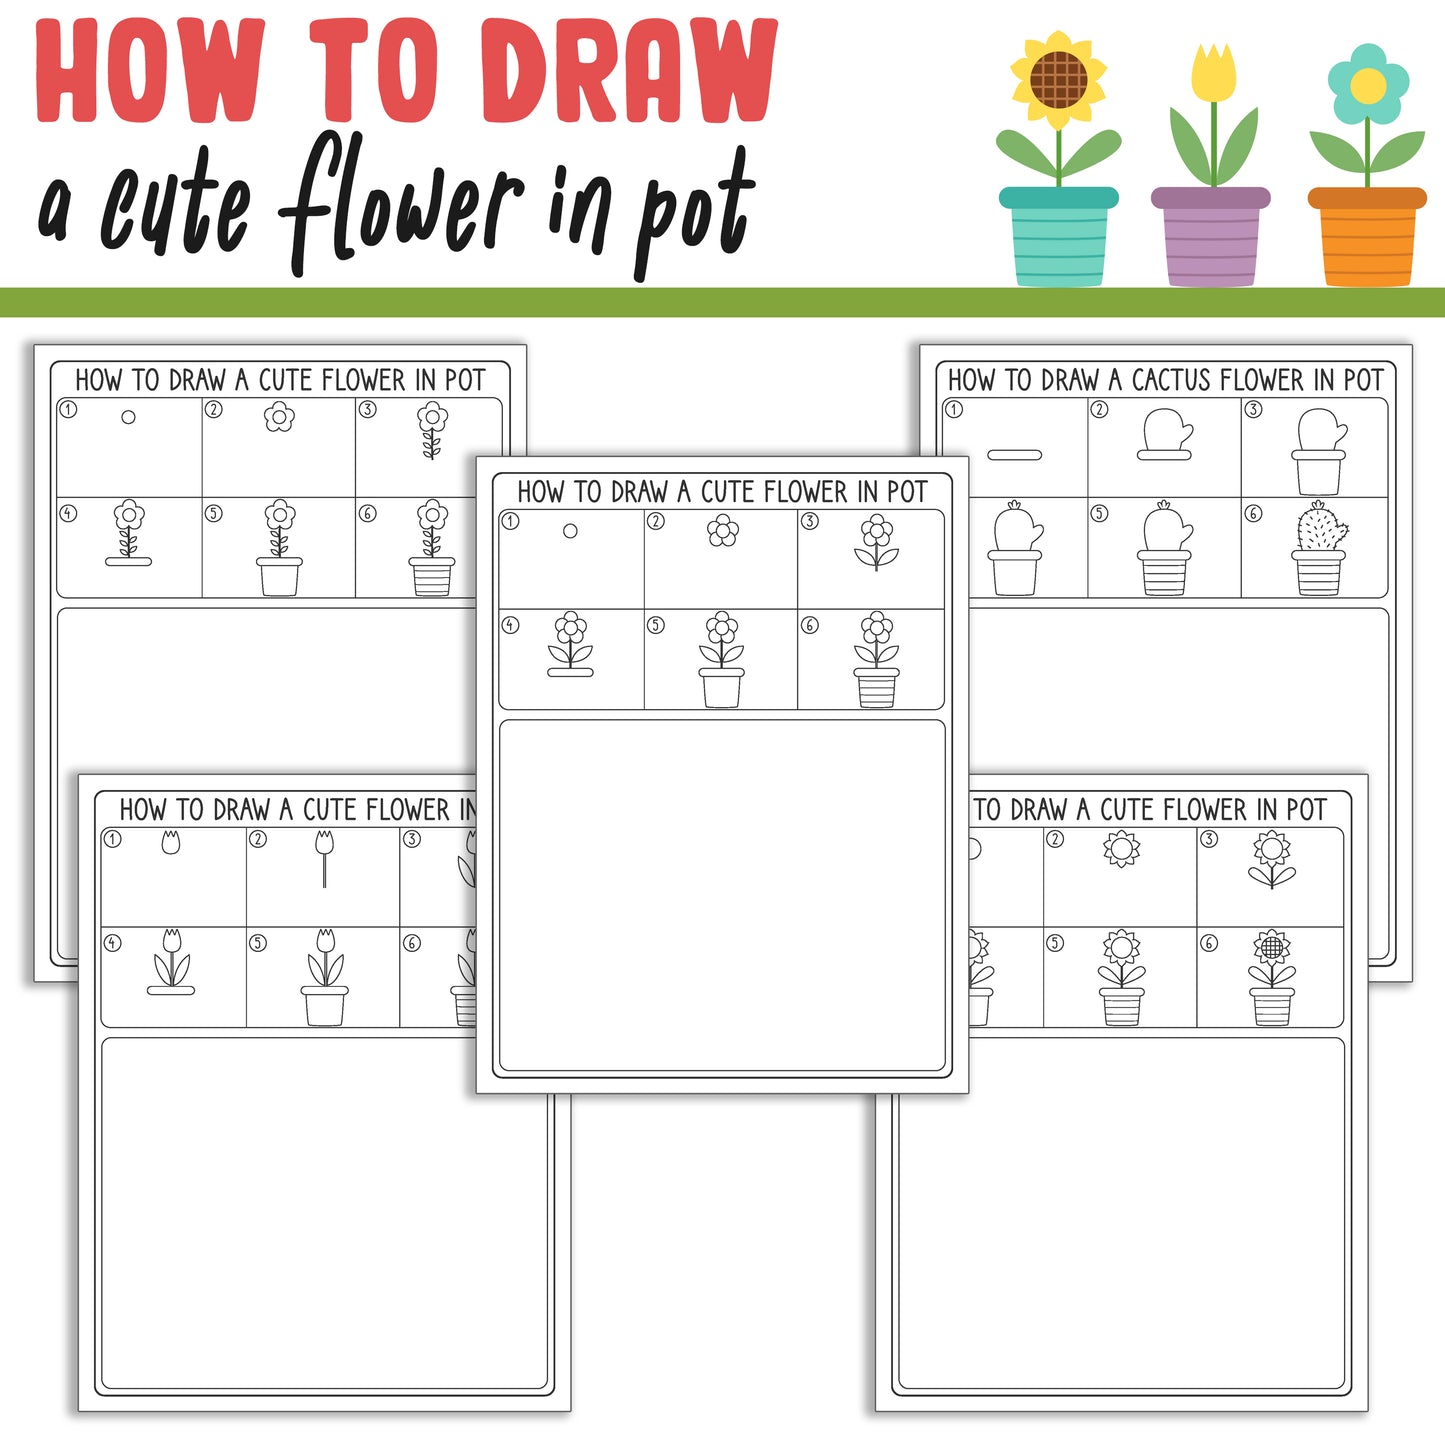 How To Draw a Cute Flower & Cactus in Pot, Directed Drawing Step by Step Tutorial, Includes 5 Coloring Pages, PDF File, Instant Download